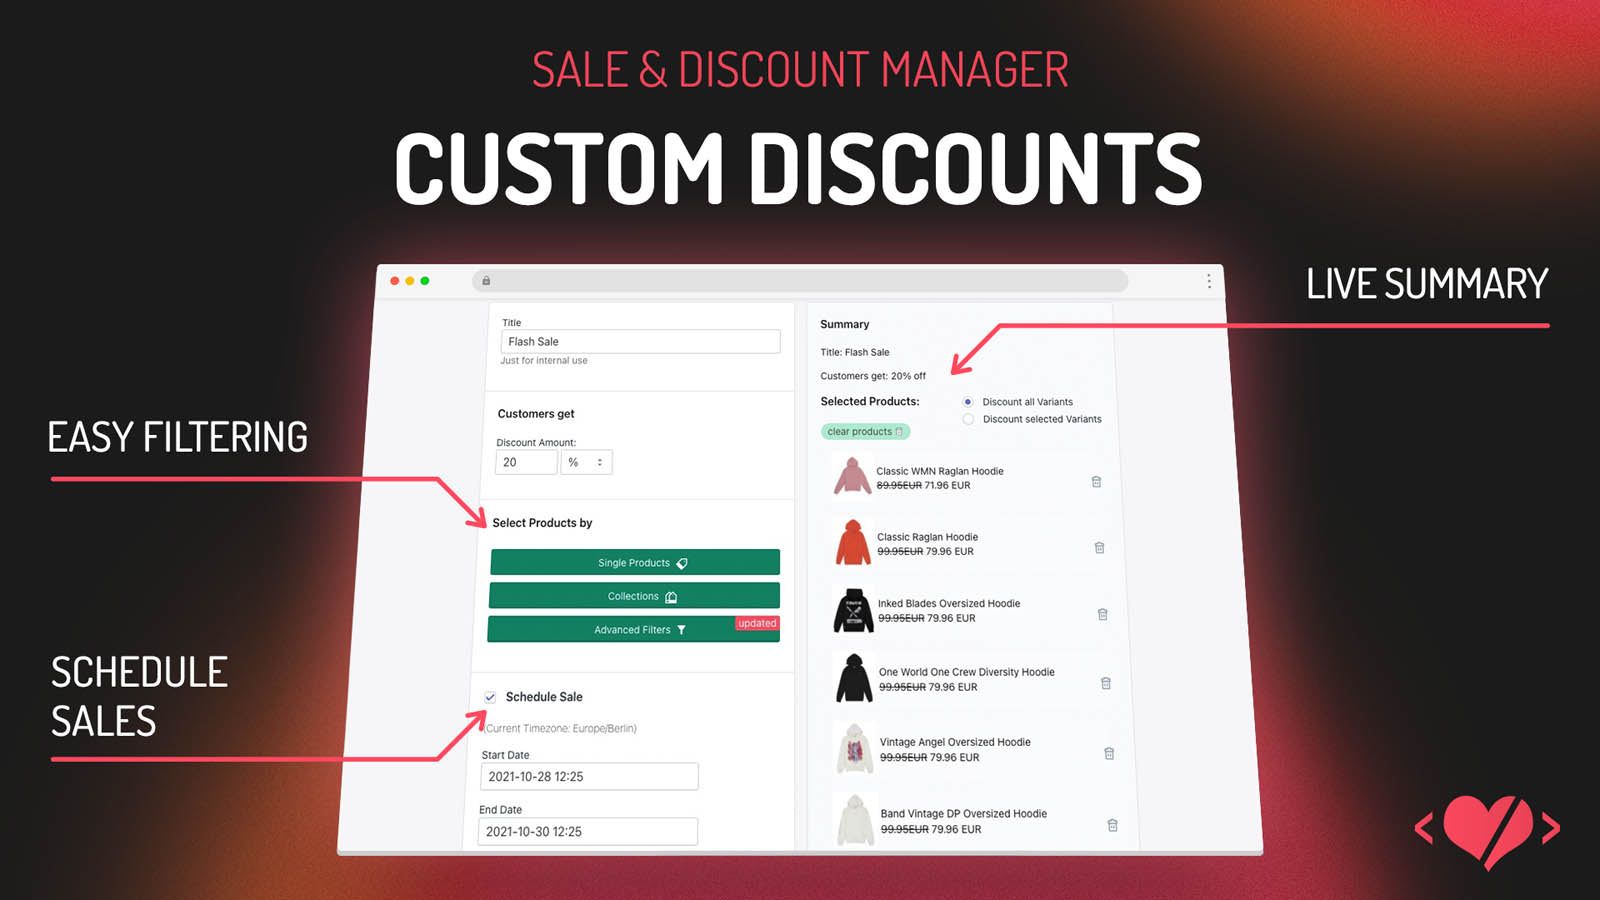 Custom Discounts with easy filtering and live summary